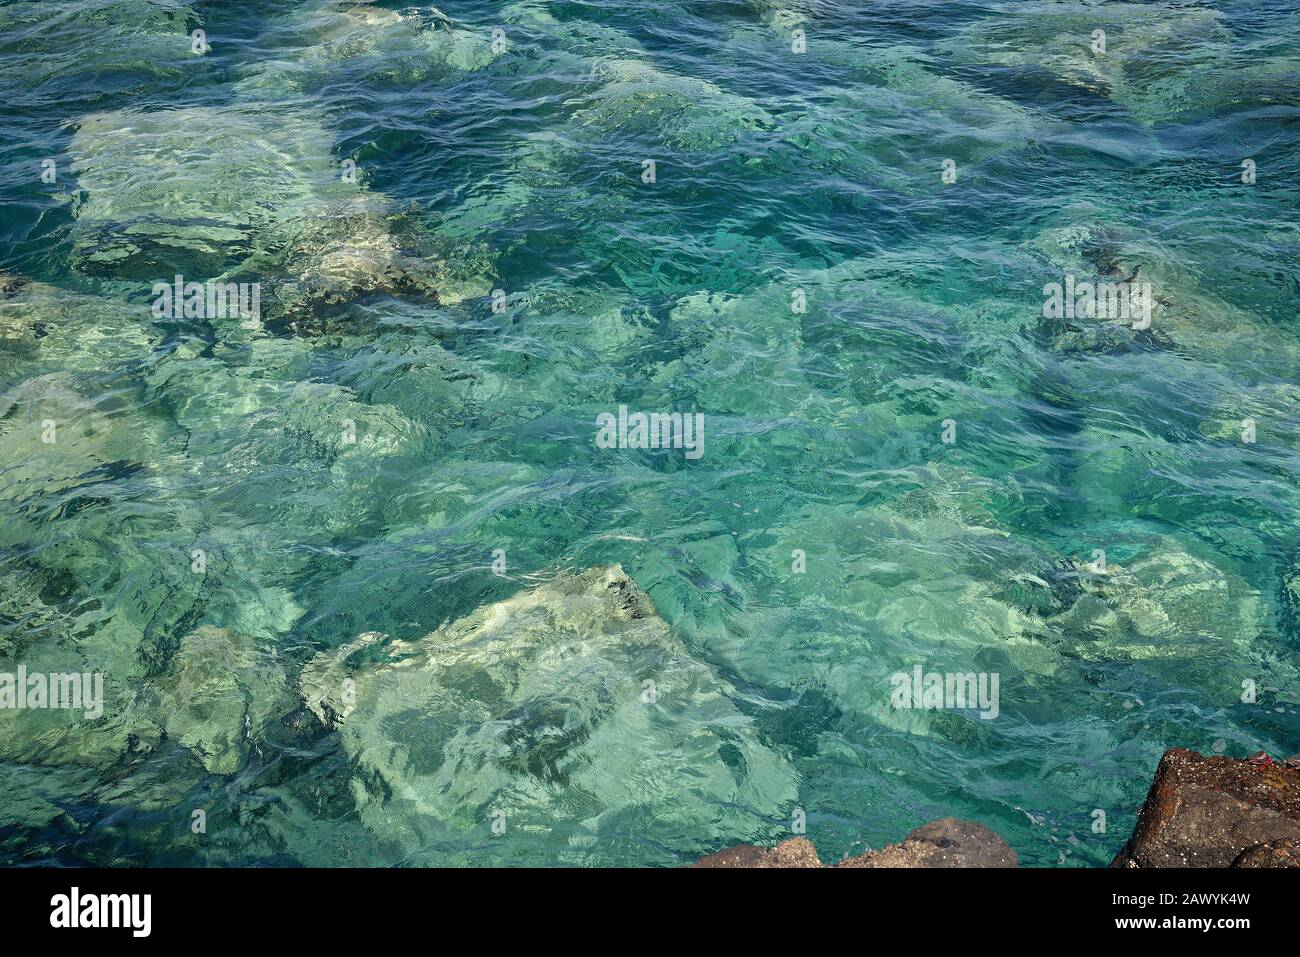 A sea green water scene with rocks below. Suitable as a background image. Stock Photo